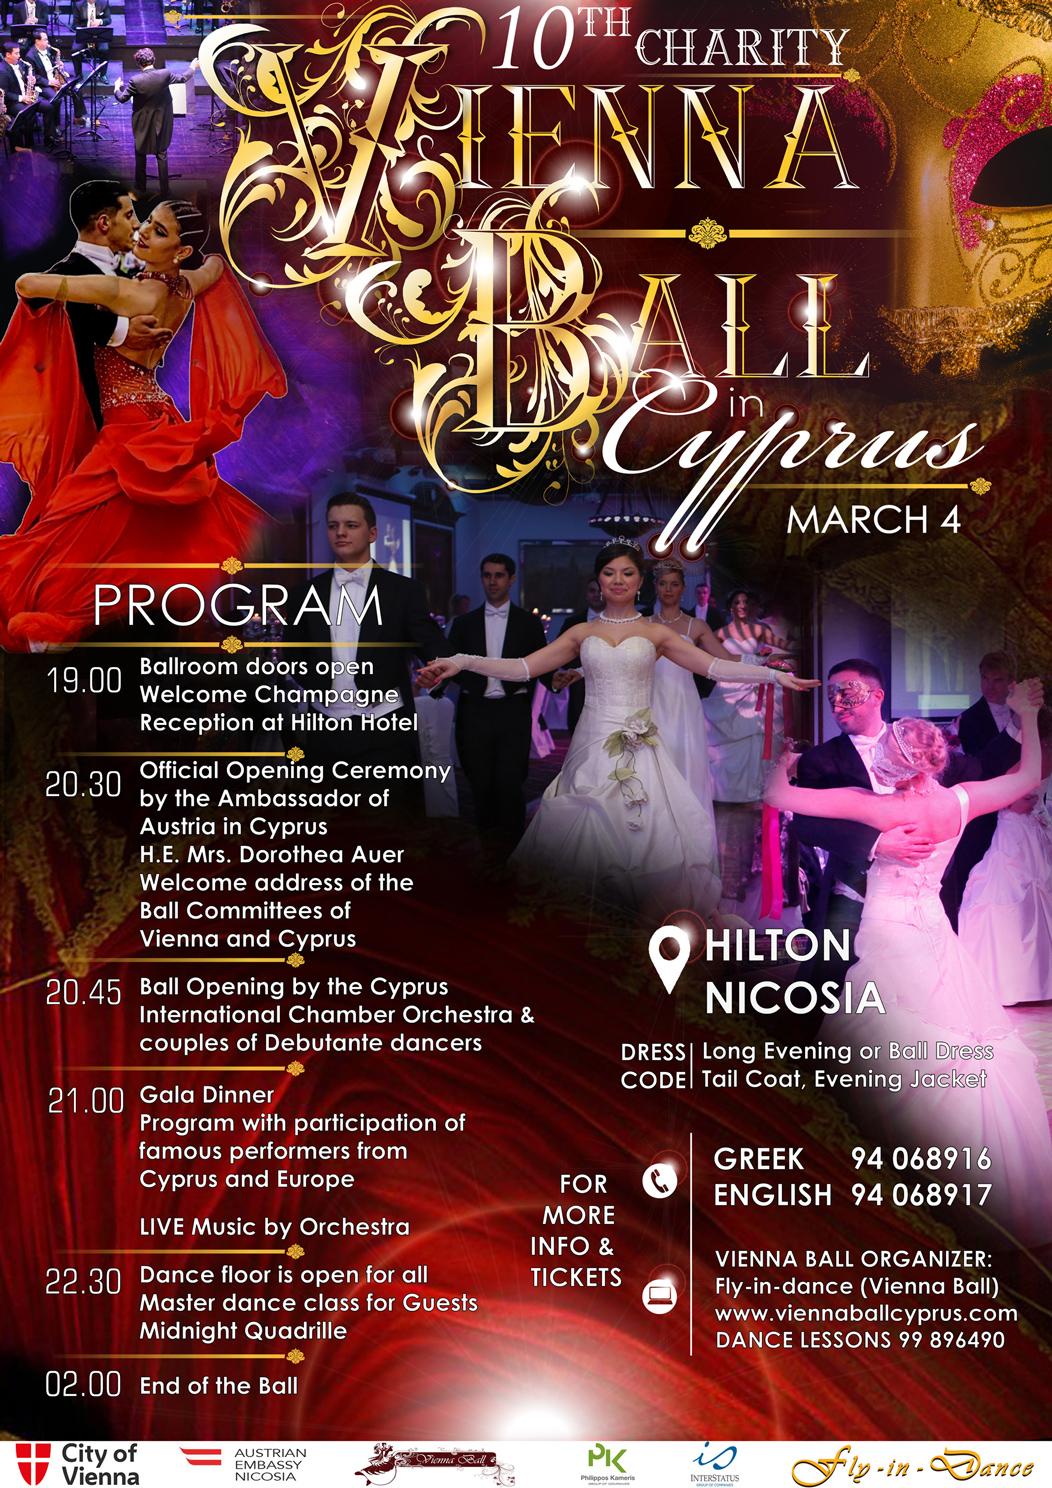 10th CHARITY VIENNA BALL IN CYPRUS 